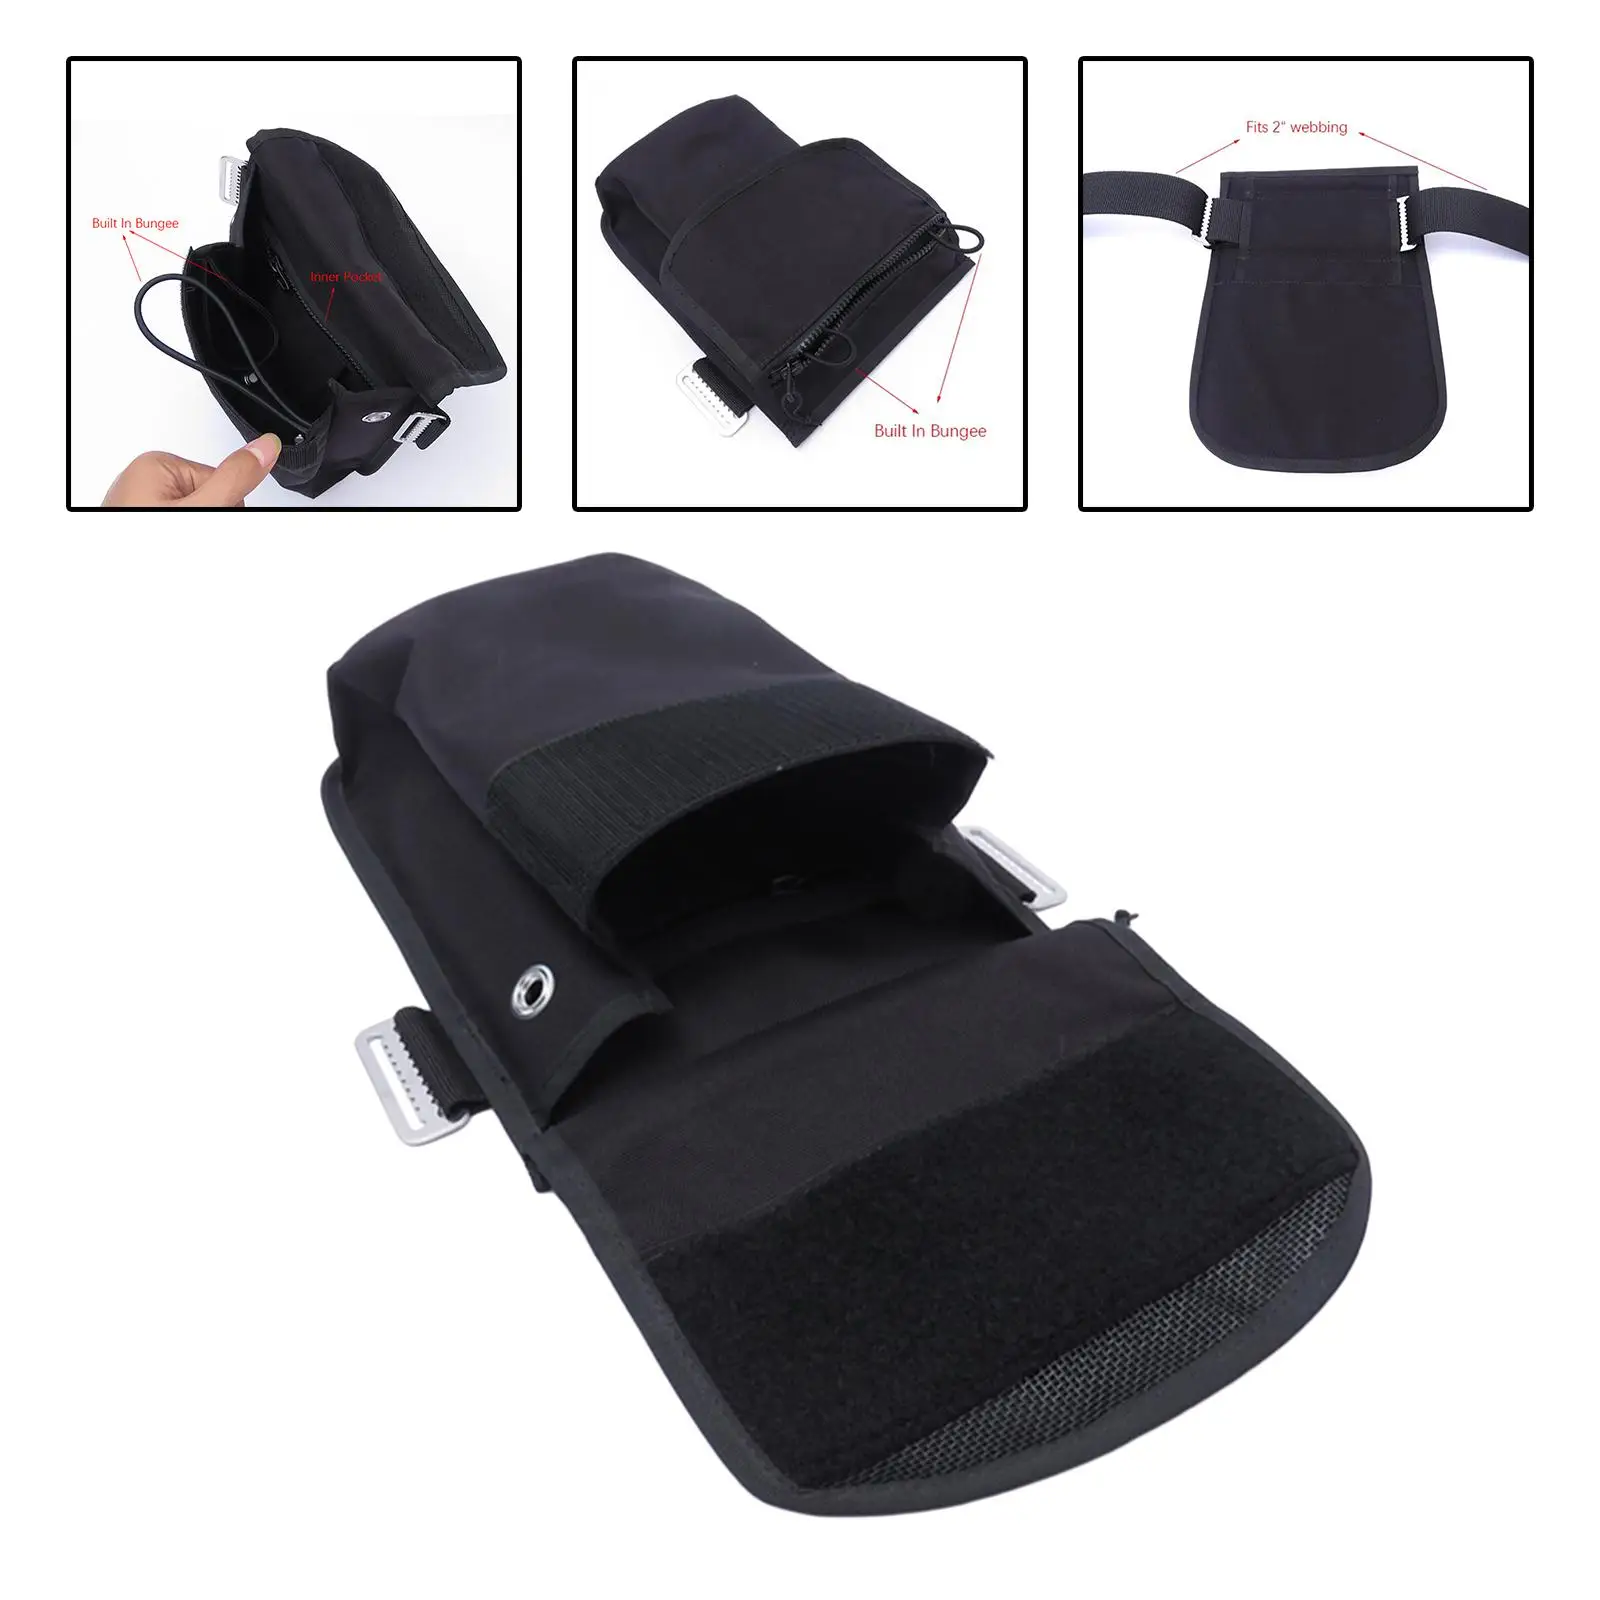 Scuba Diving Thigh Pocket Storage Pocket Technical Diving Storage Bag for Underwater Swimming Snorkeling Water Sports Black